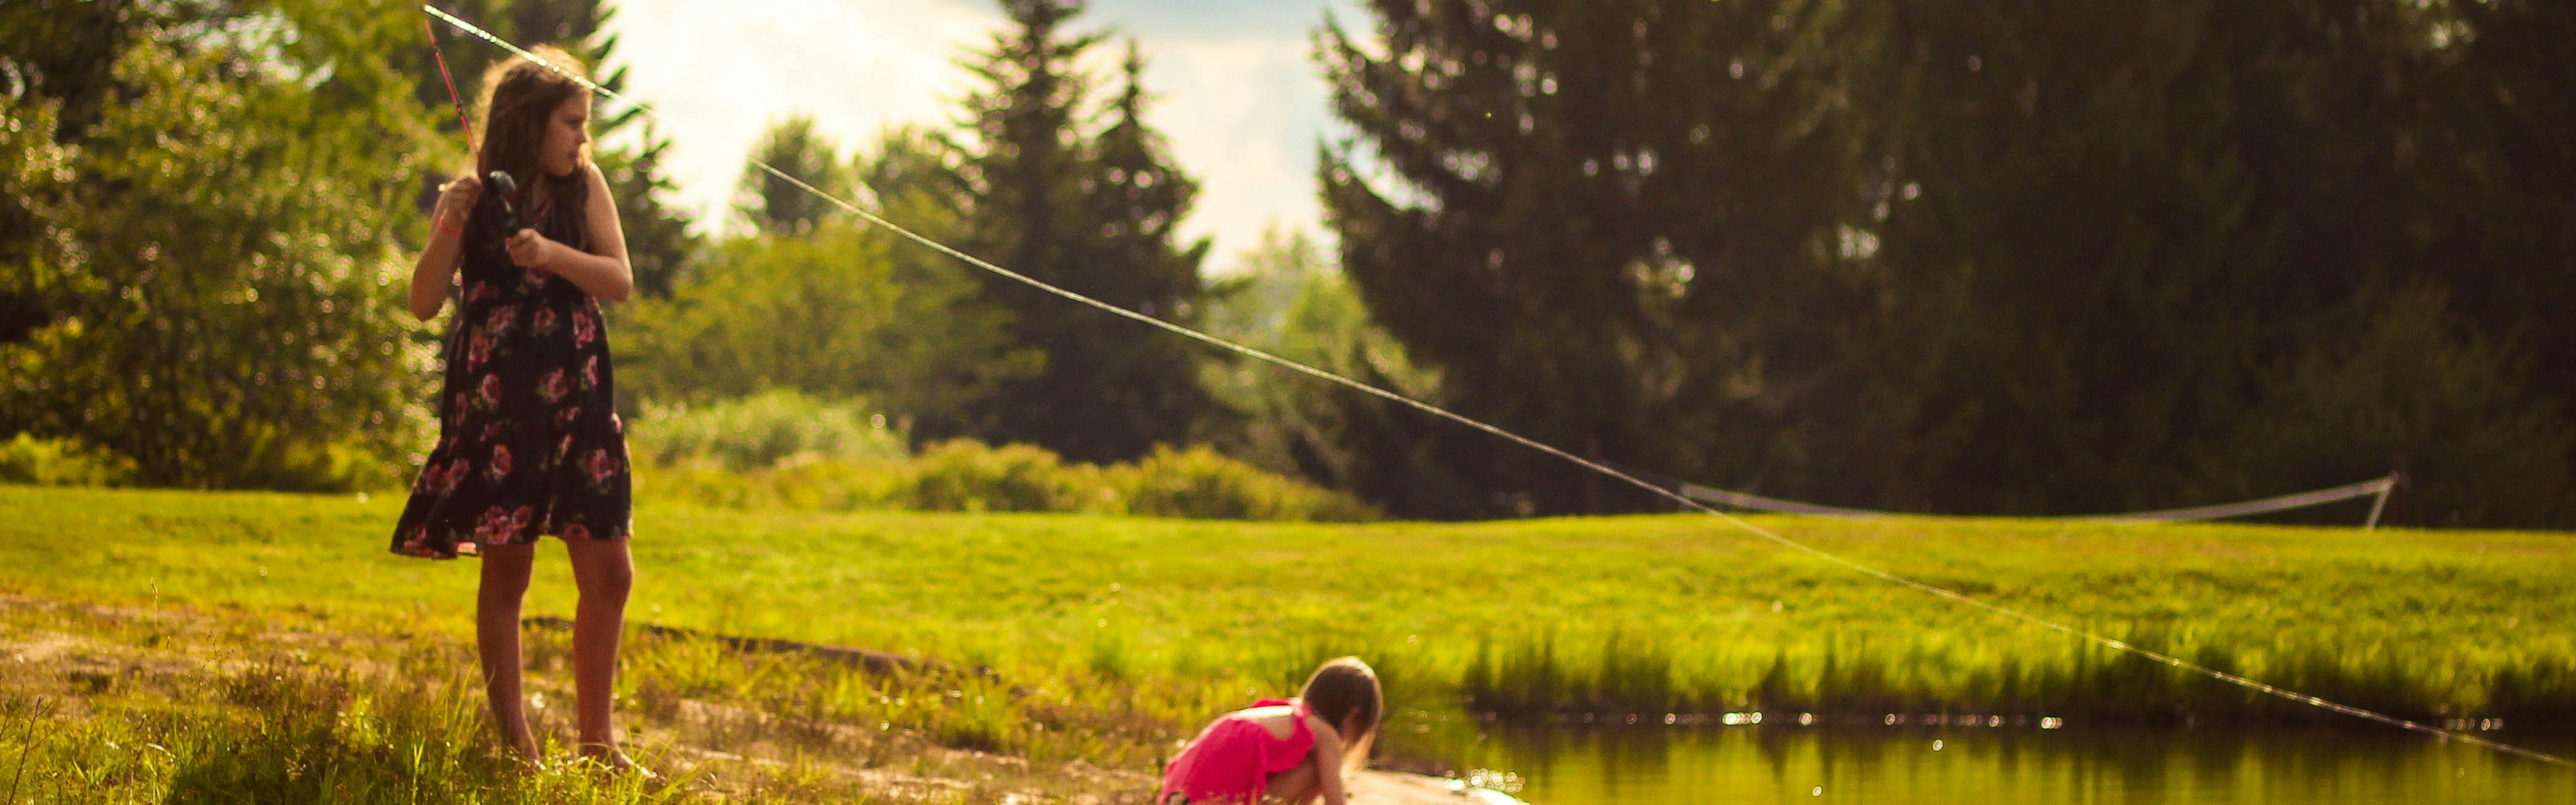 The Beginner's Guide to Good Fishing: This Easy Rig Gets Kids Fishing!  (Part 3) 